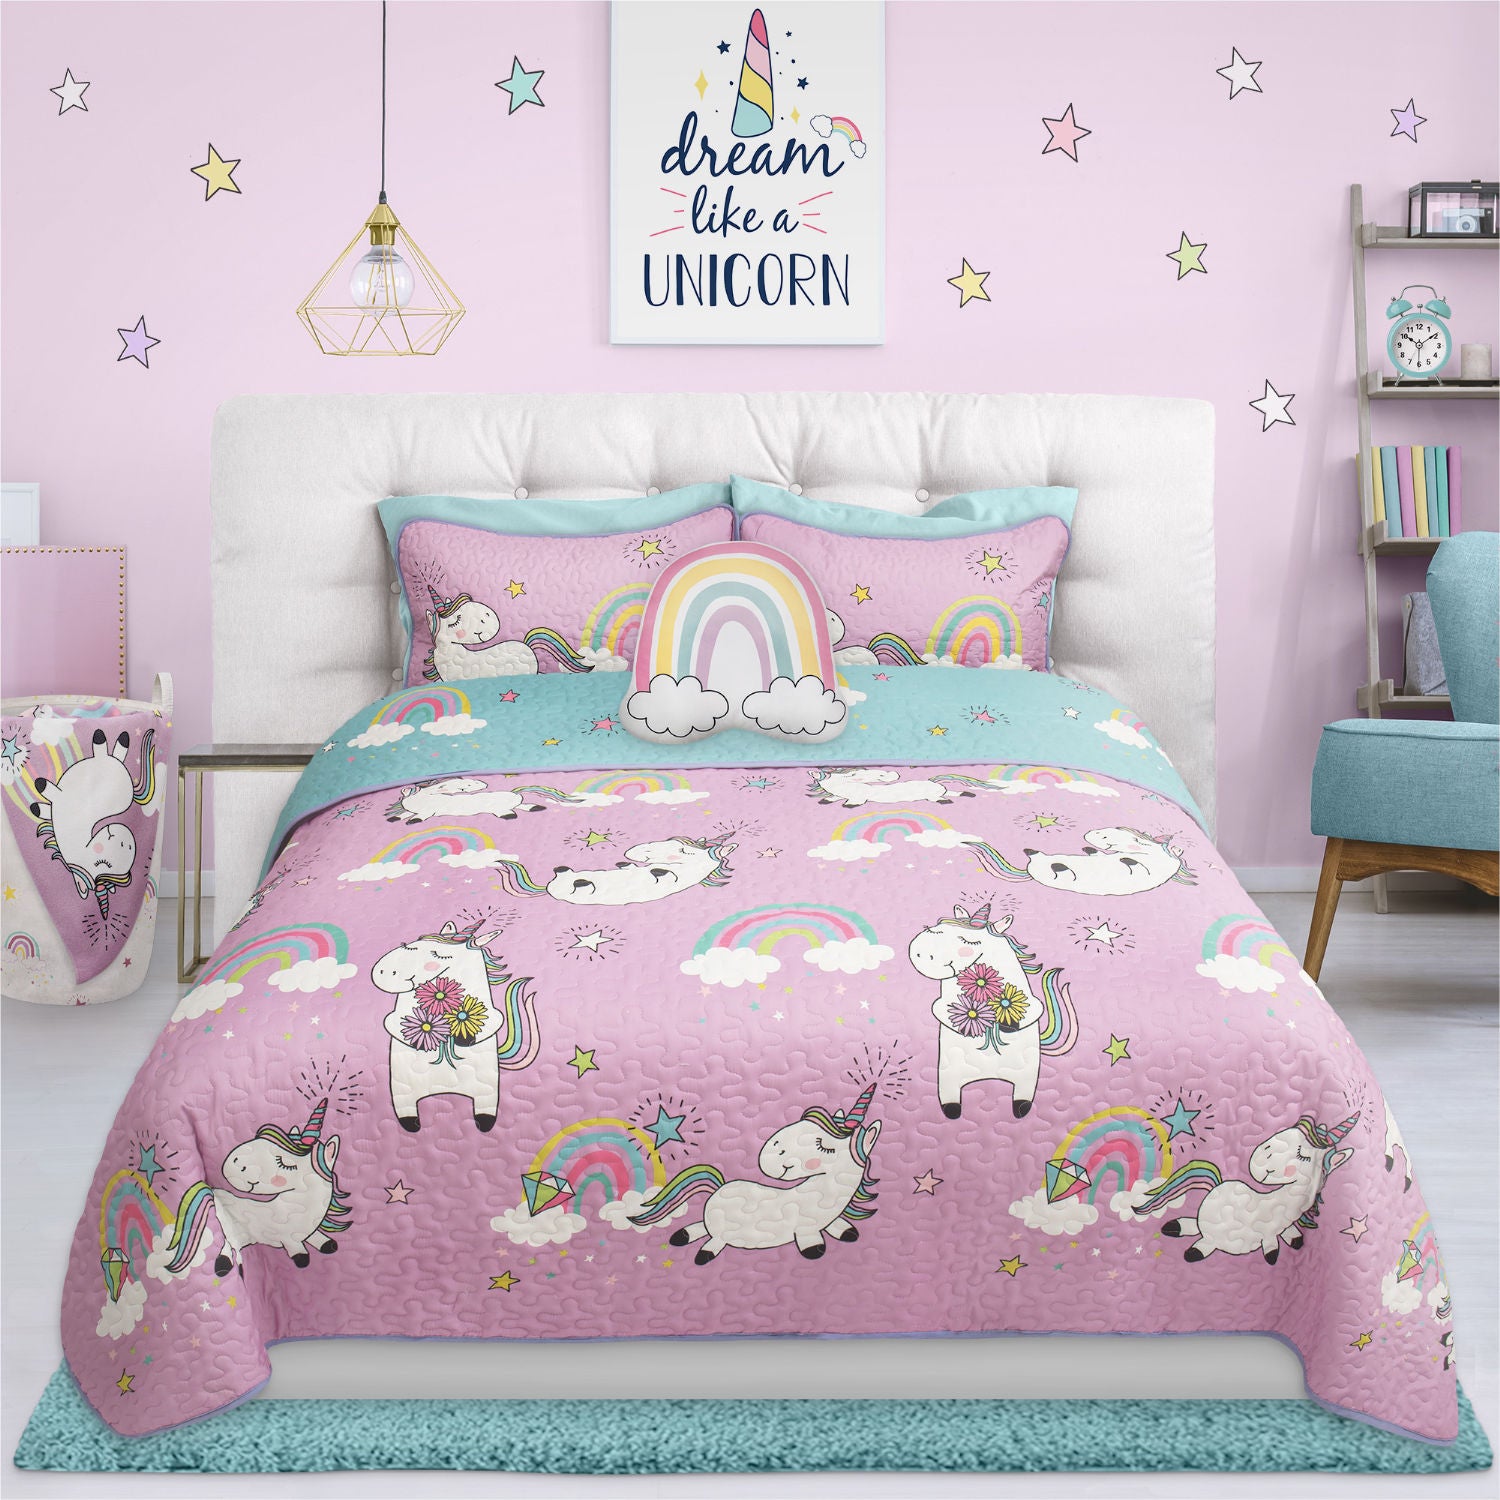 Woven Printed Quilt Bedding Set 2 Piece Twin Unicorn